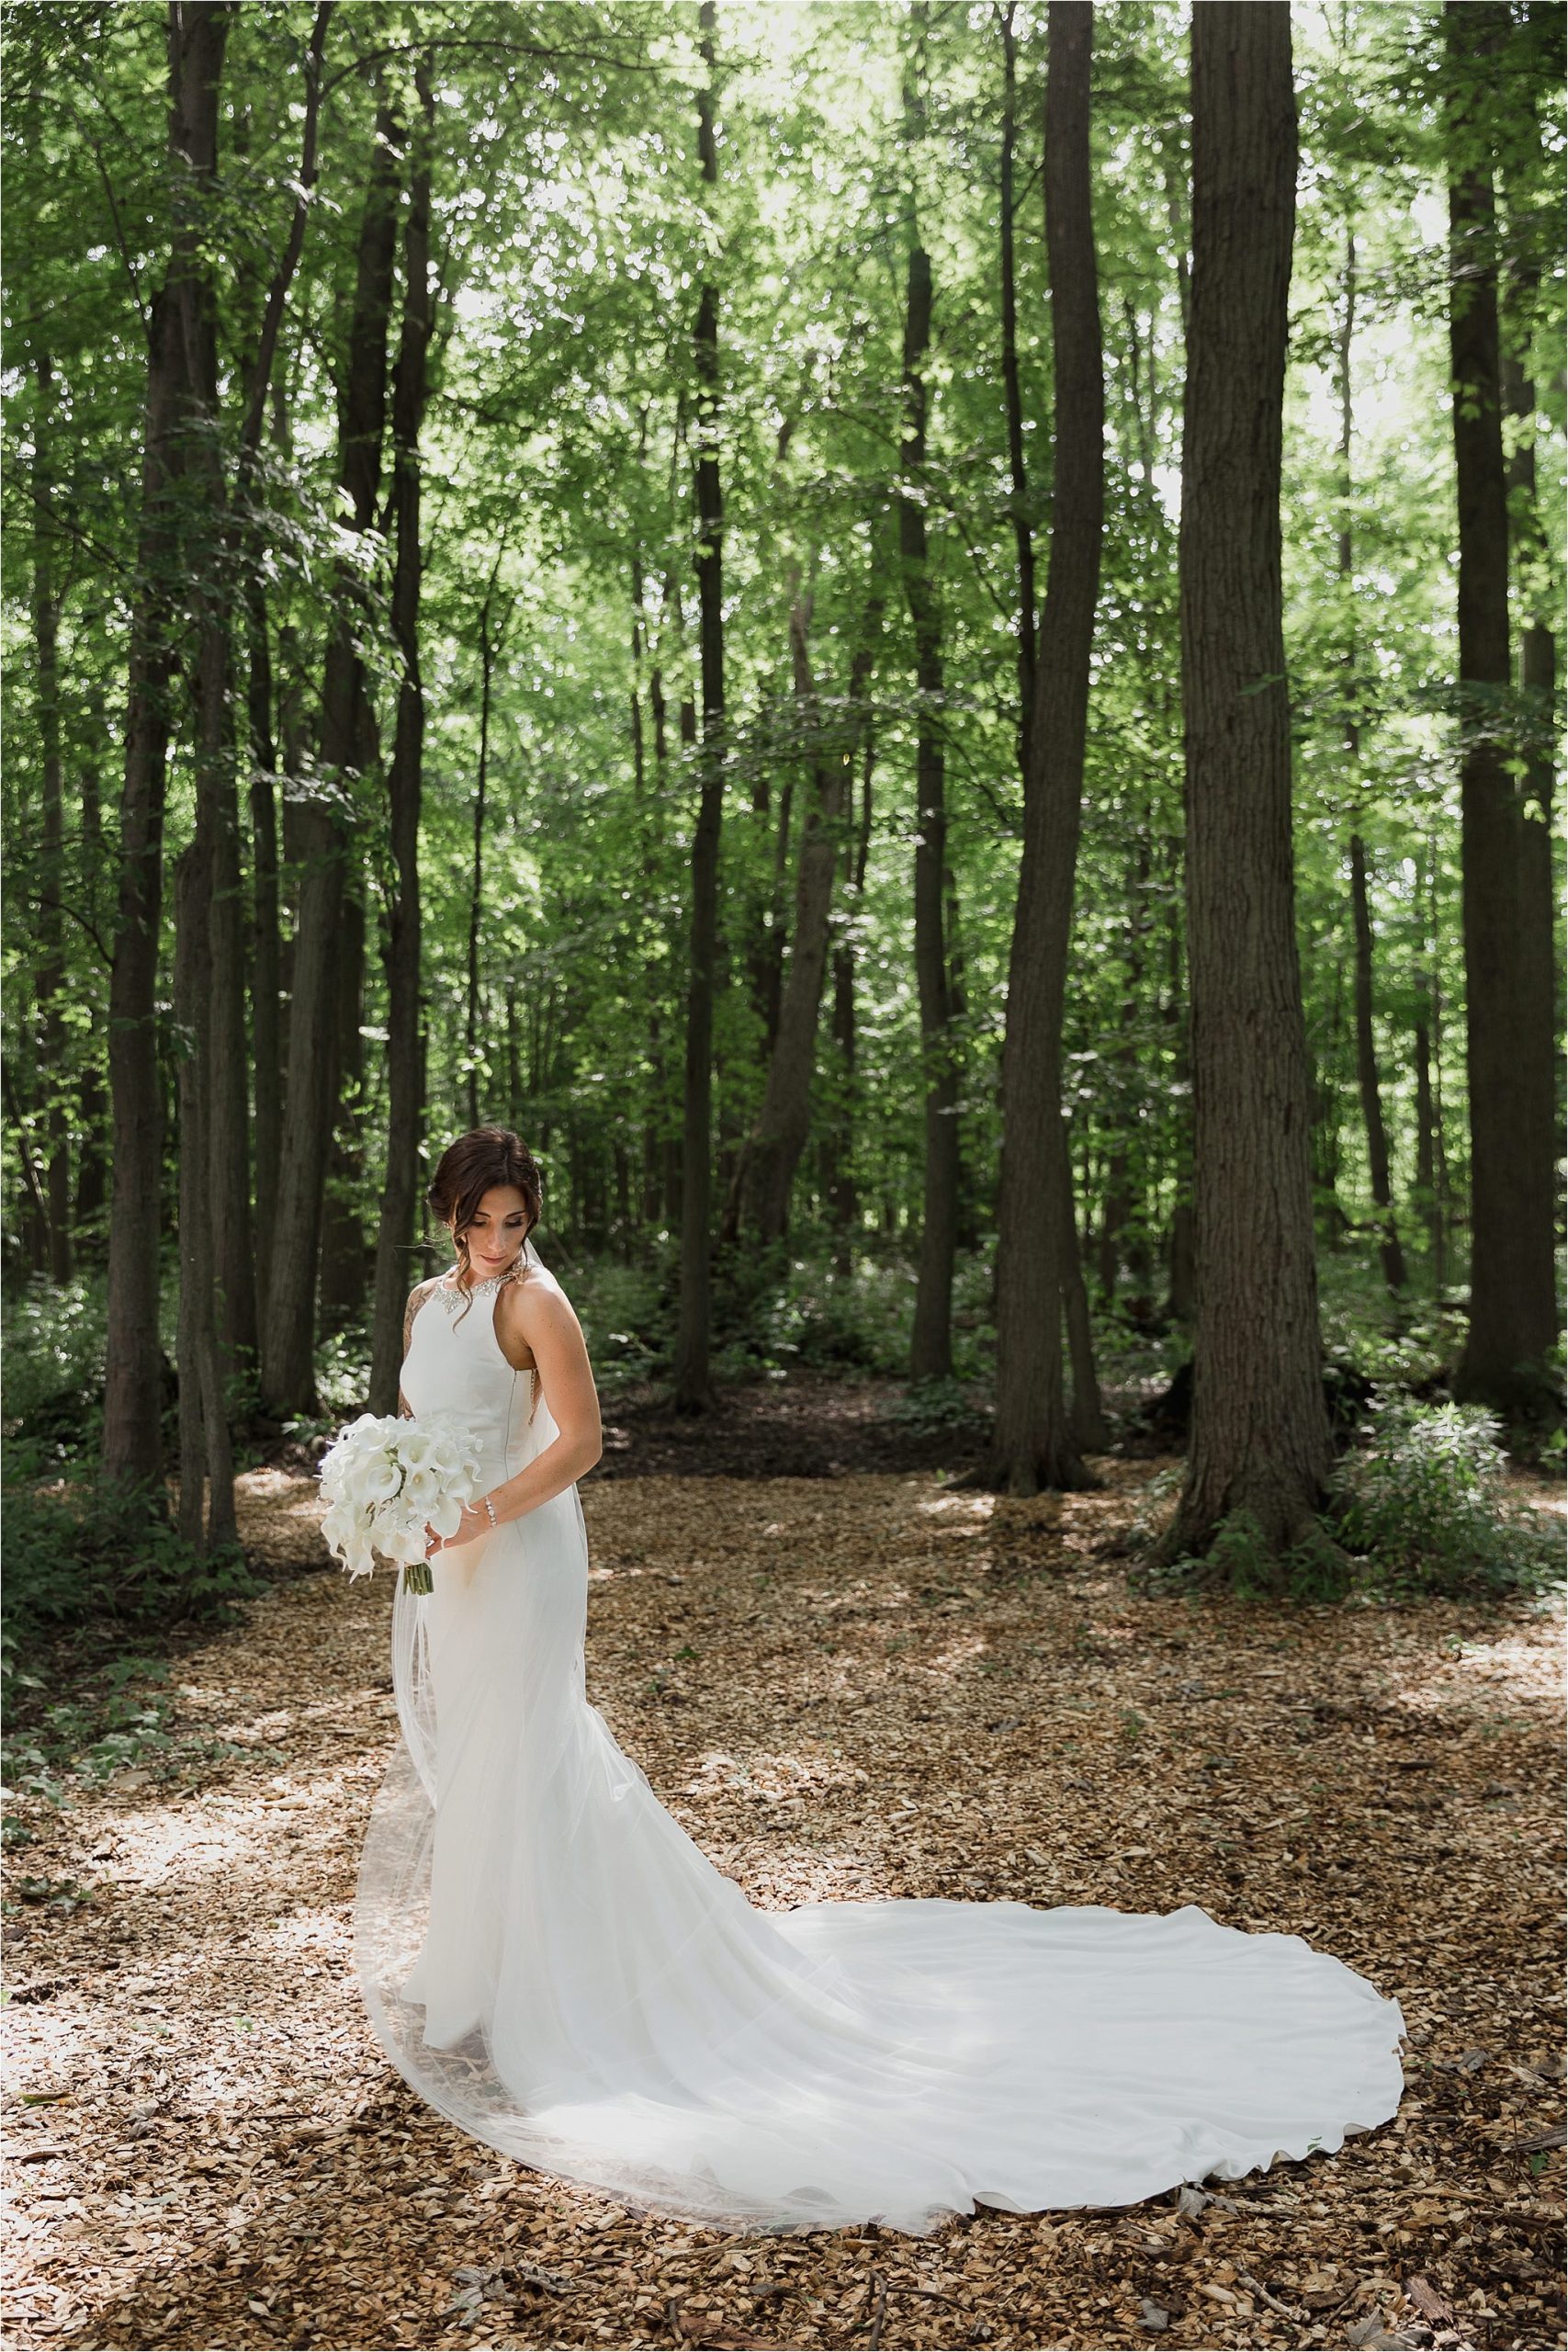 Sonia V Photography, The Clearing ceremony wedding venue, bride in the fores